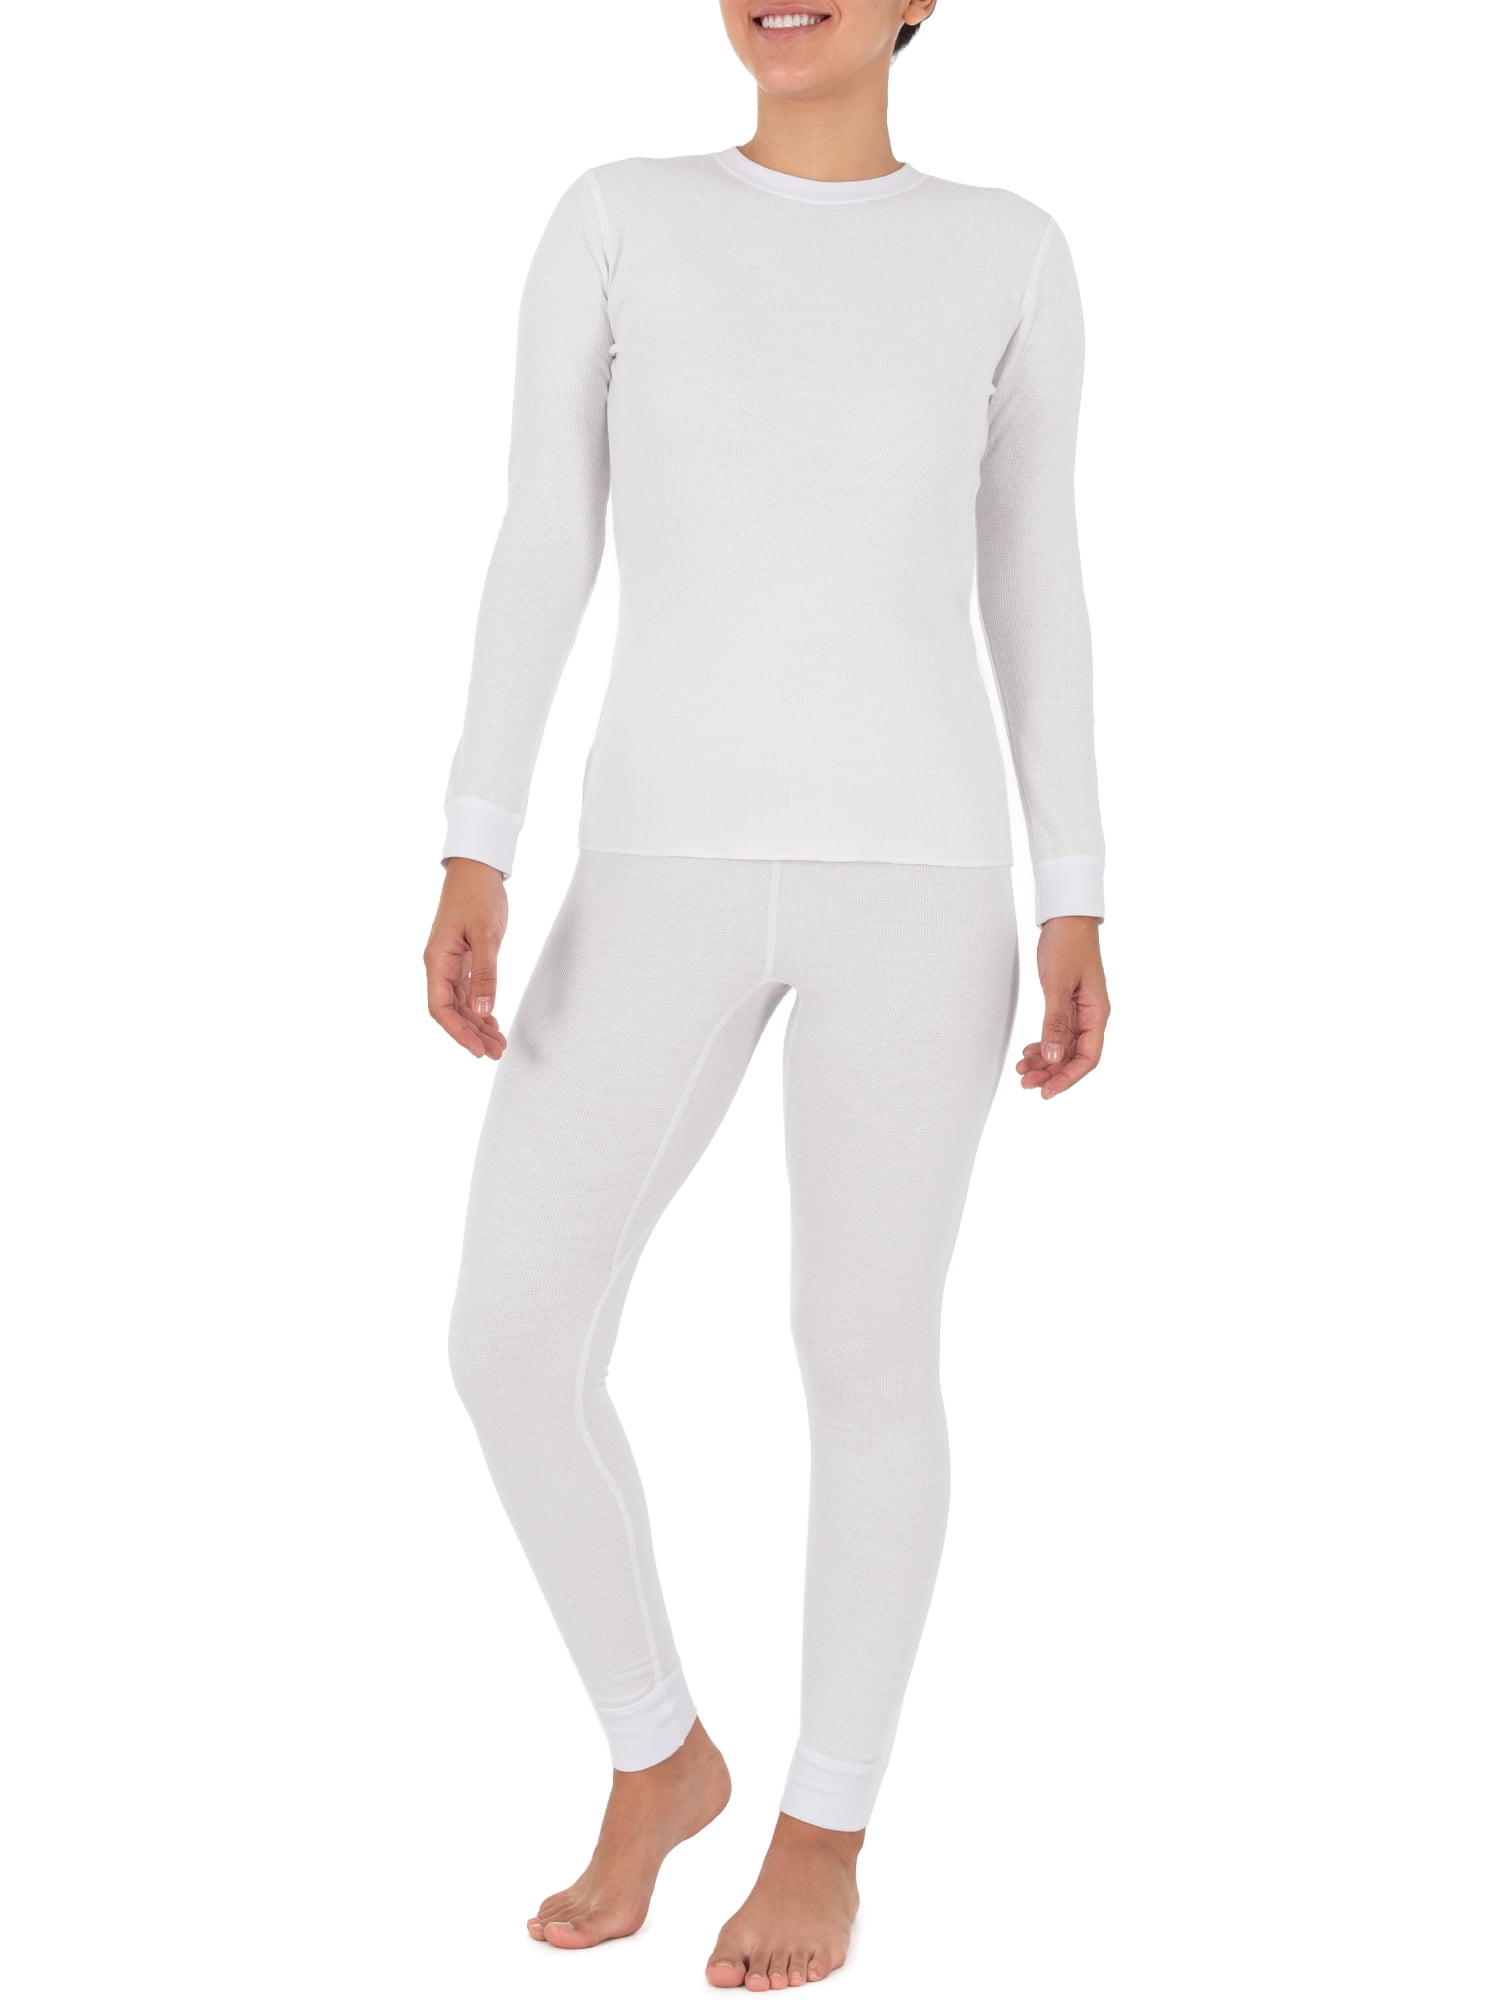 Fruit of the Loom Women's and Women's Plus Long Underwear Thermal